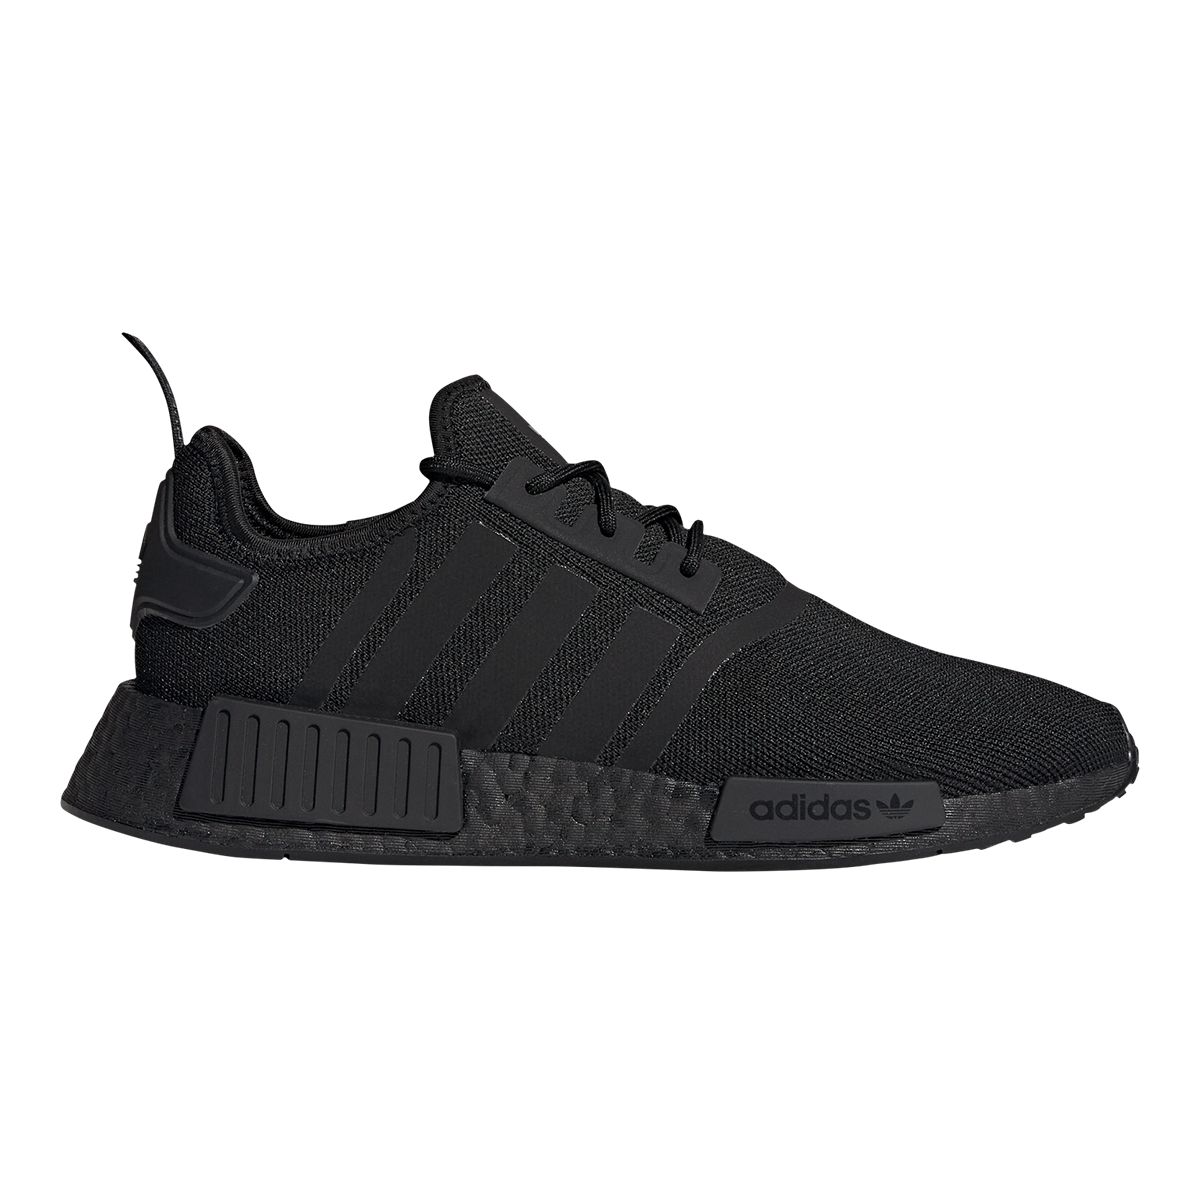 adidas Men's Nmd_R1 Boost Shoes Sneakers Knit